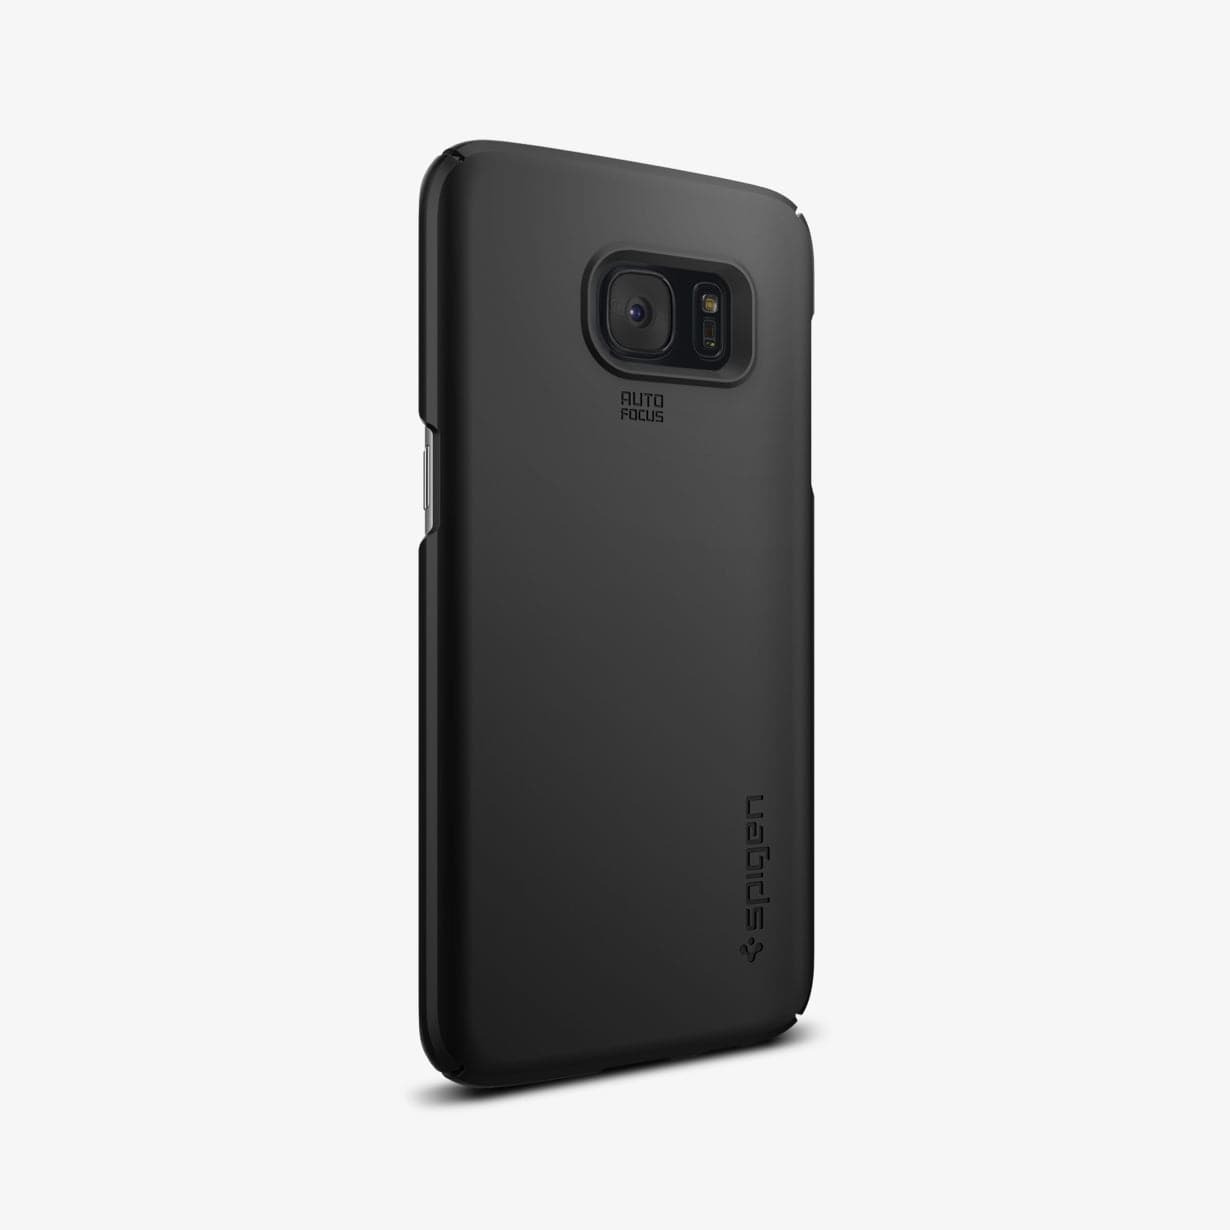 556CS20029 - Galaxy S7 Series Thin Fit Case in black showing the back and partial side